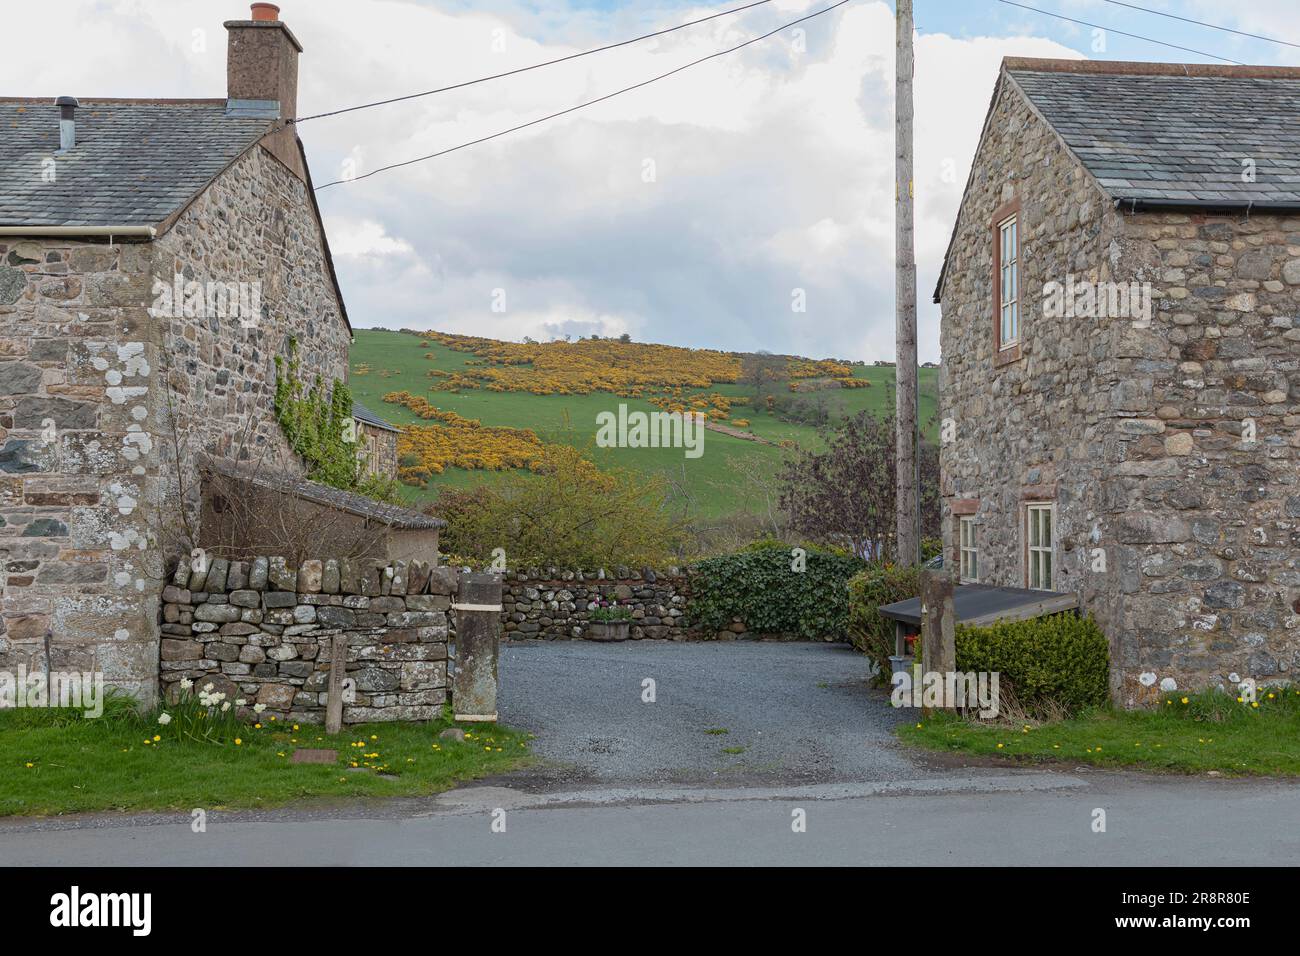 Looking between two farm buildings at gorse on a hillside Stock Photo